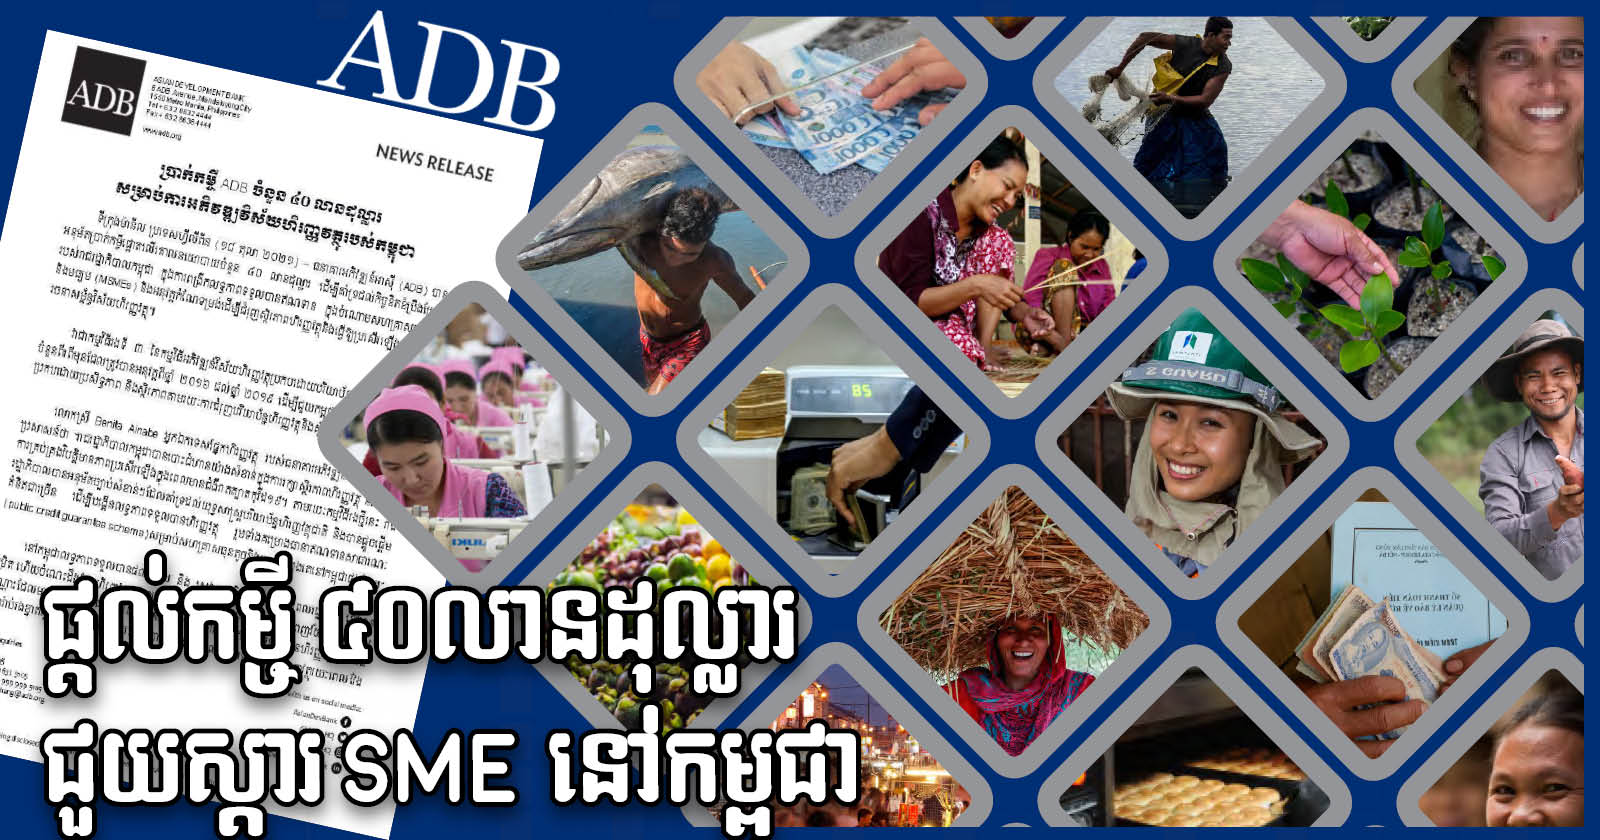 ADB Provides US$40-million Loan to Support SMEs & Financial Stability in Cambodia